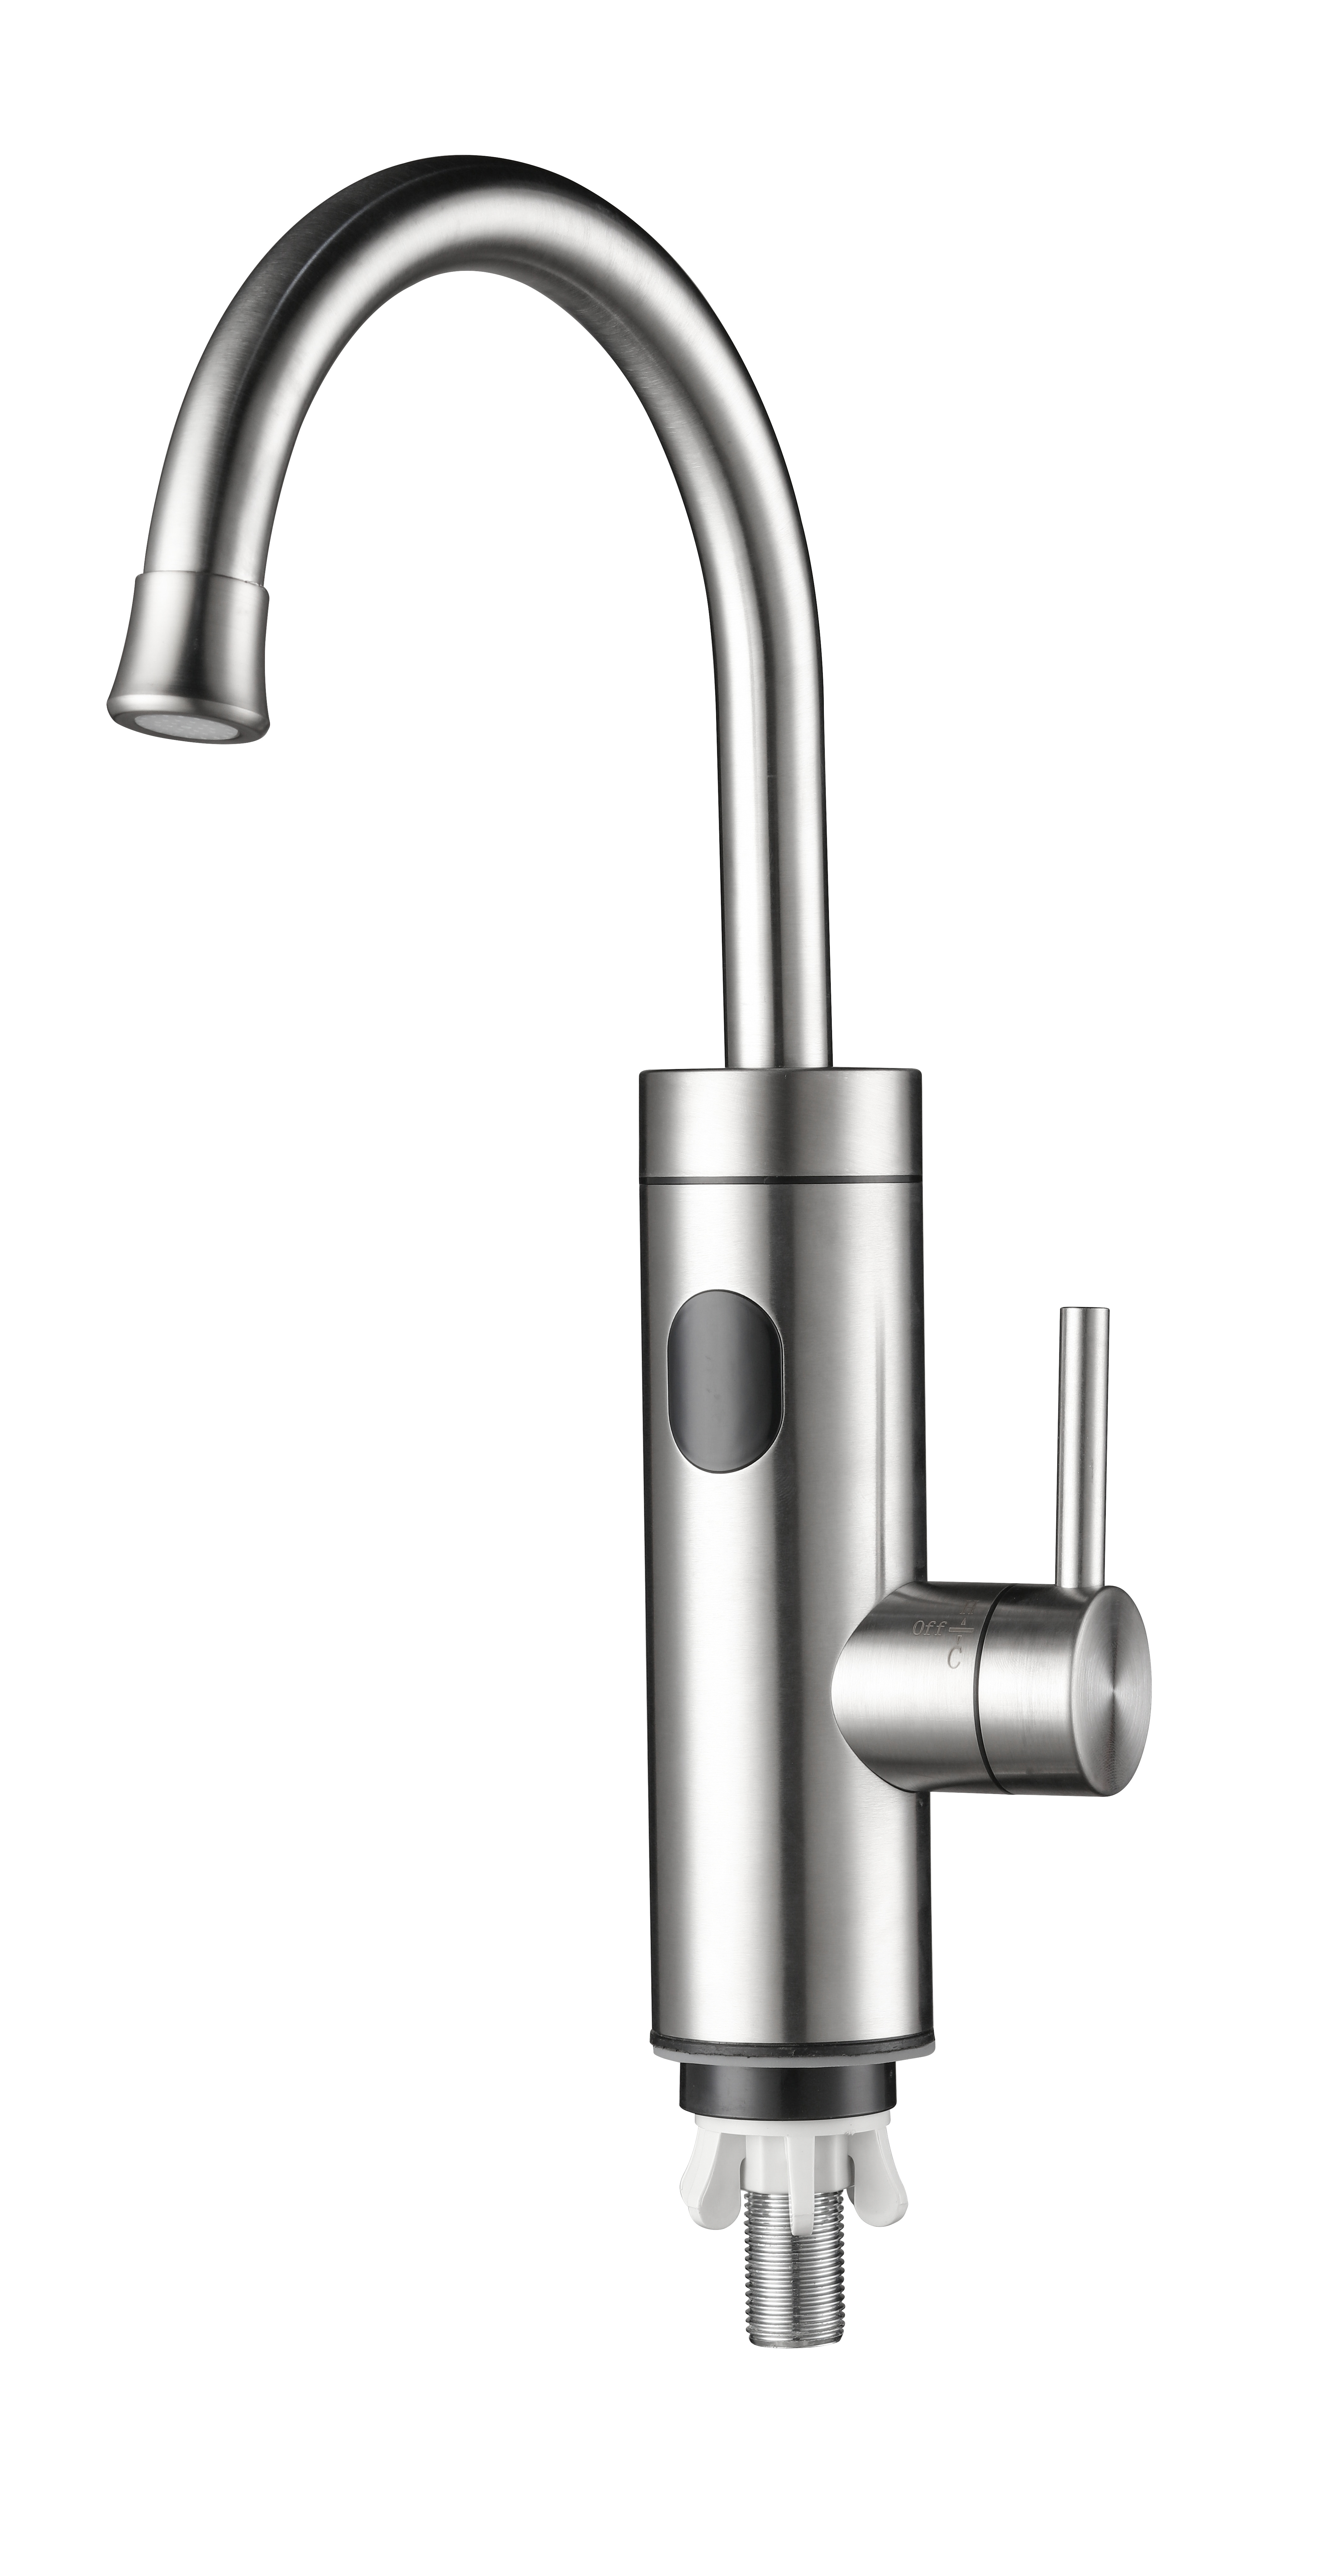 Overview of instant electric faucet